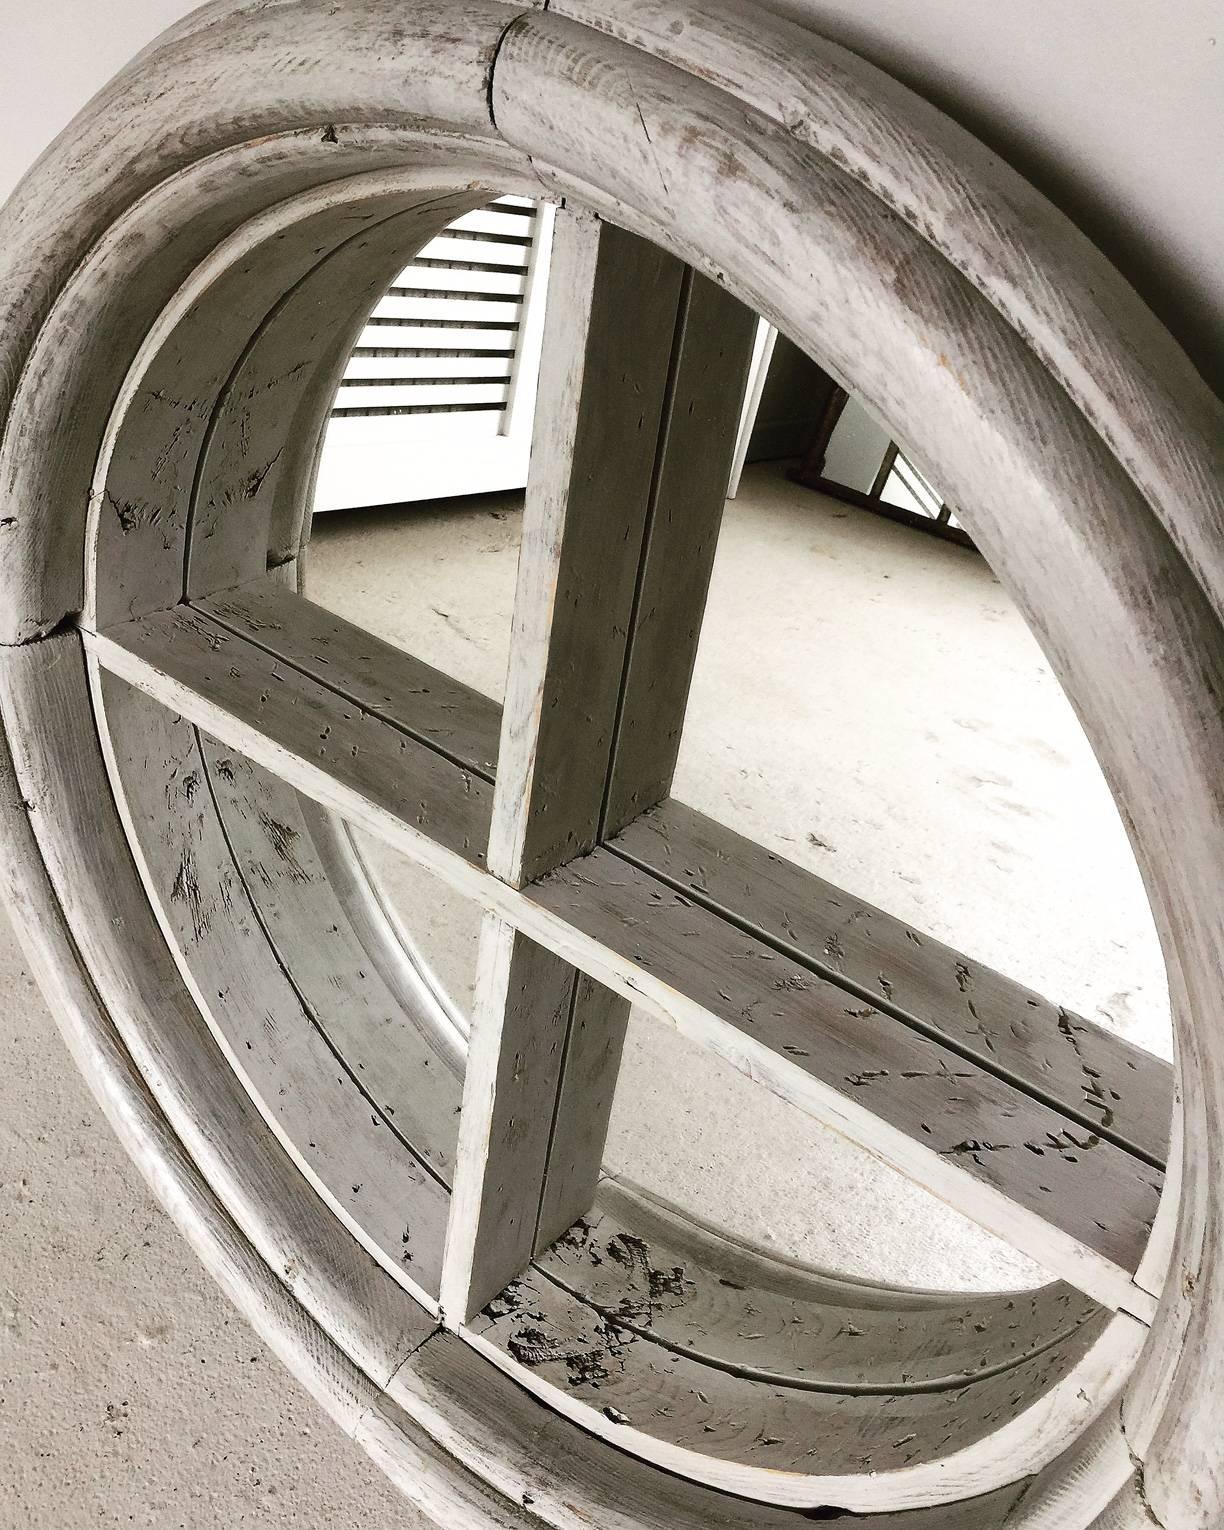 Vintage Antique salvage reclamation circular window frame converted in to a fabulous mirror suitable for interior or outside in the garden .